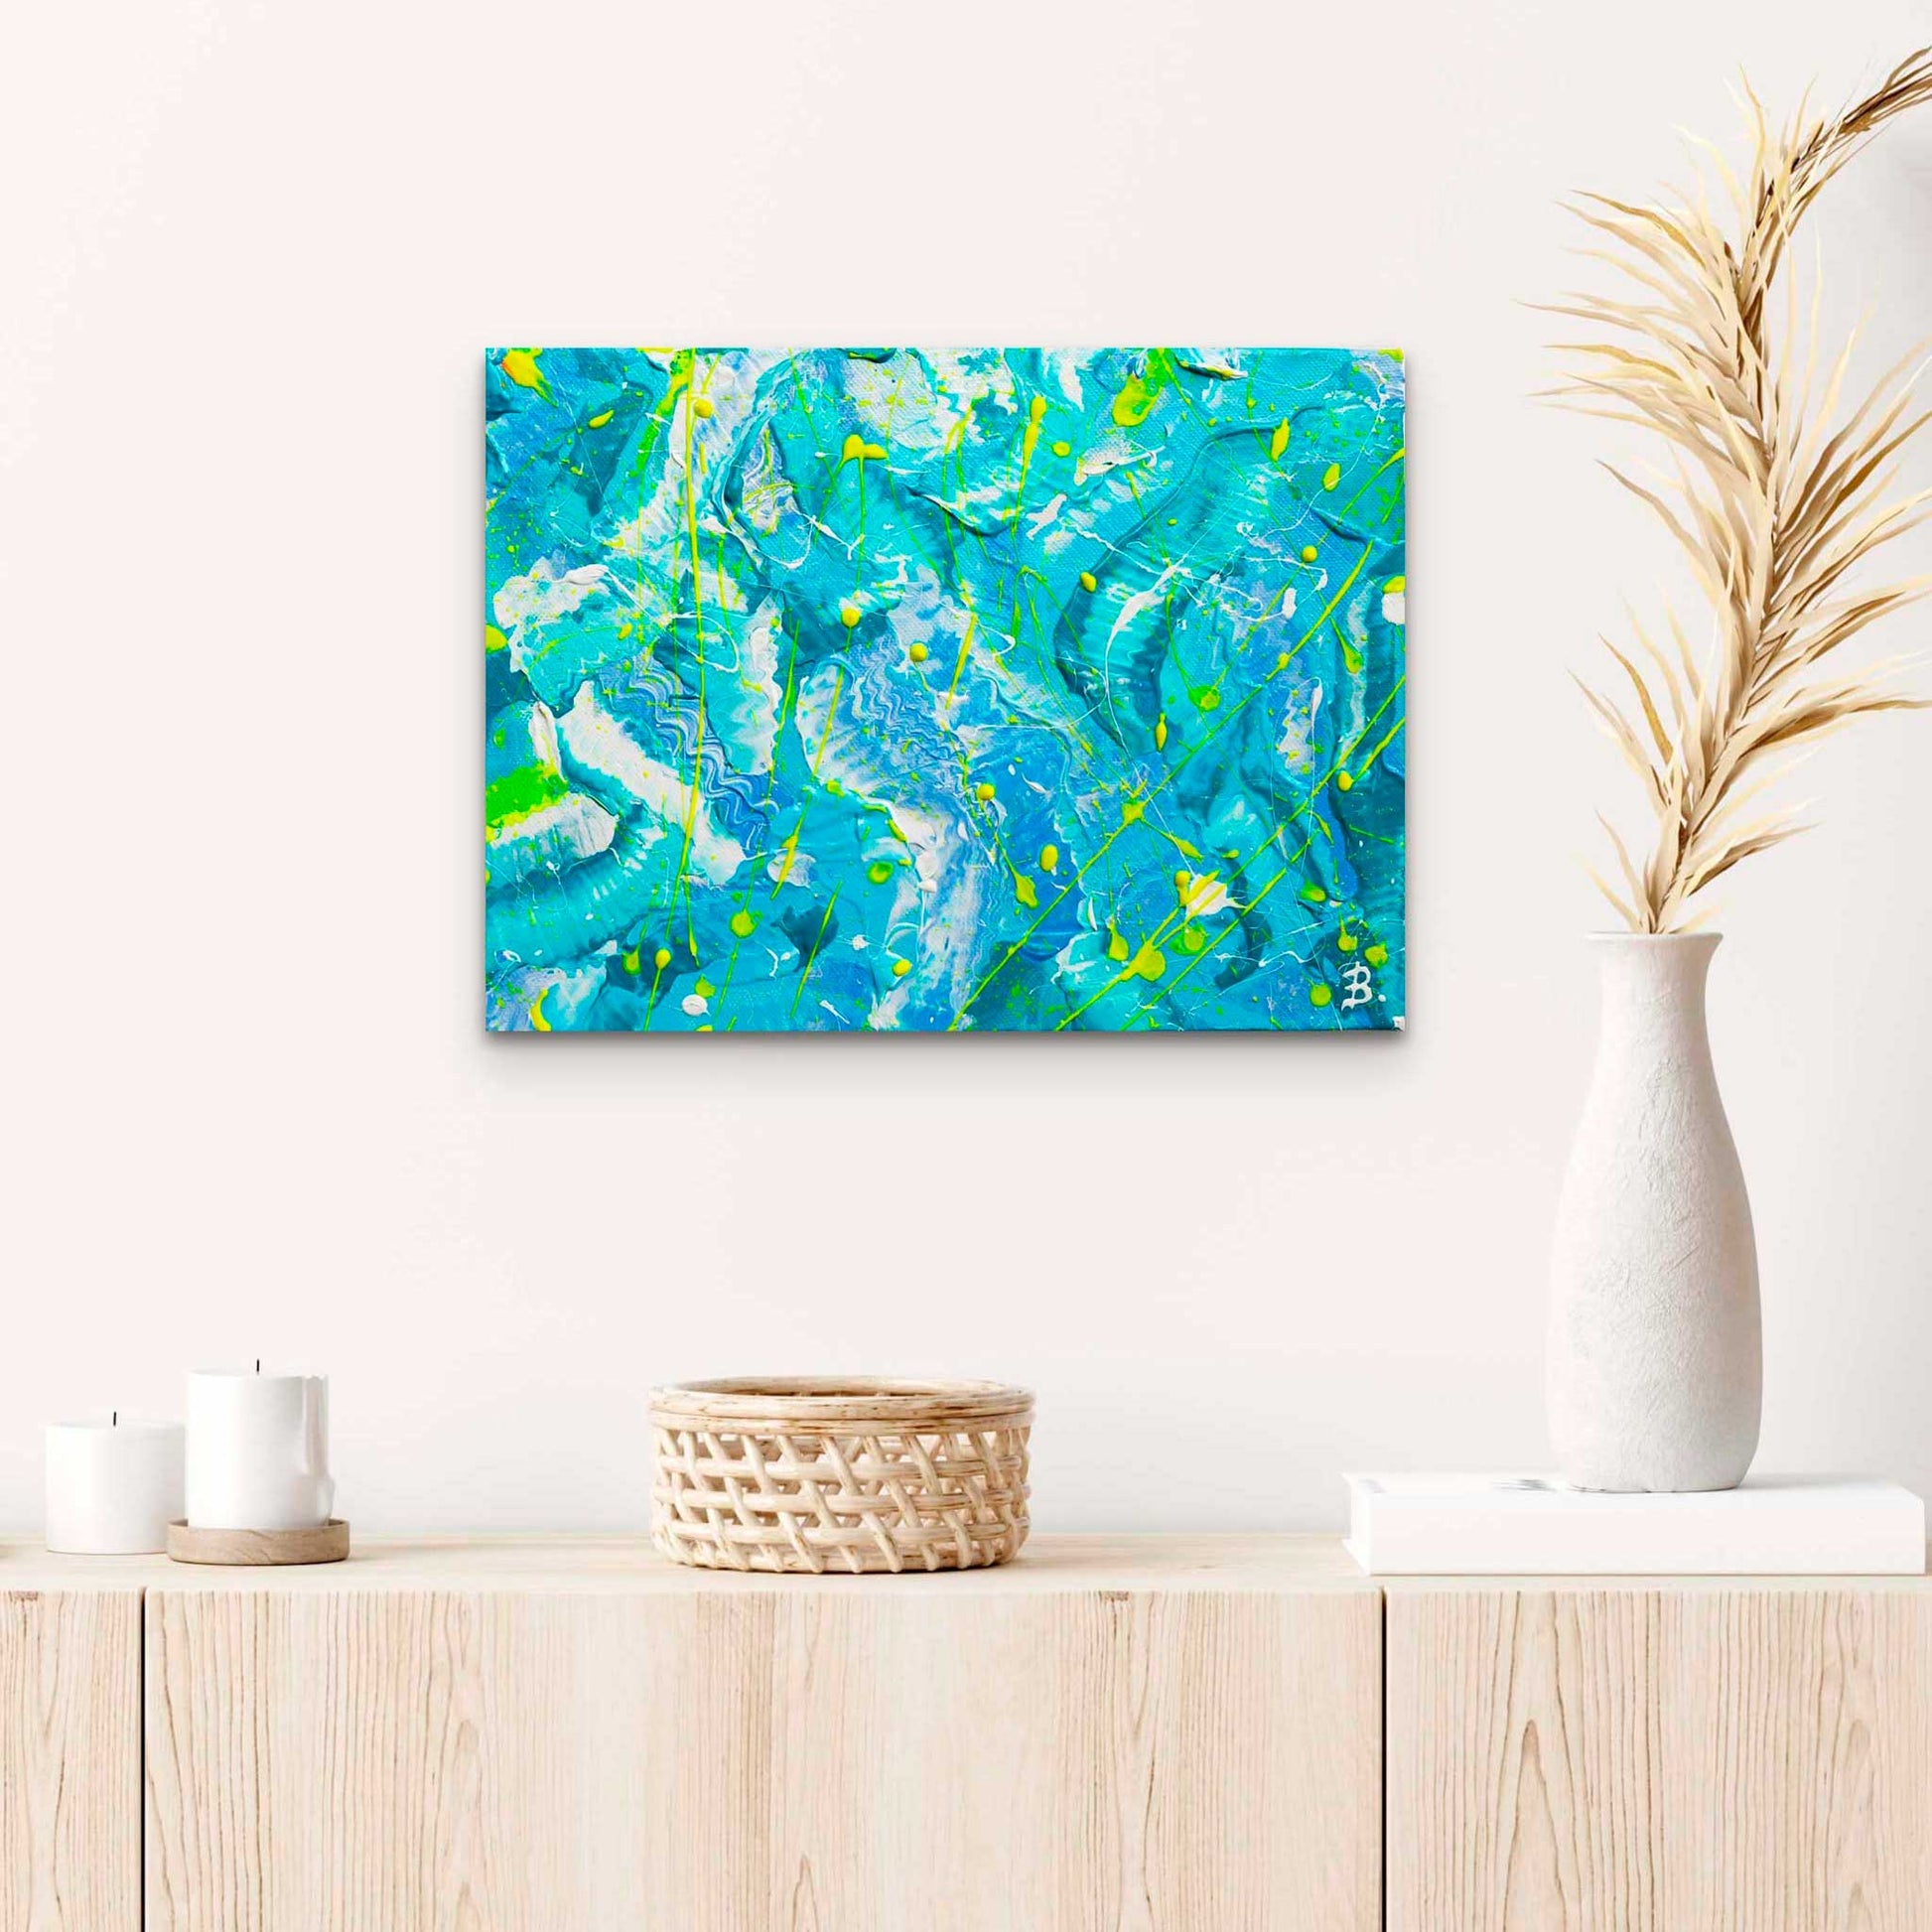 'Ocean' an original abstract painting on canvas by Bridget Bradley. Blues, aquas, whites and neon yellow colour palette make this an uplifting artwork. Seen hanging in situ above blonde wood console with beach house decor